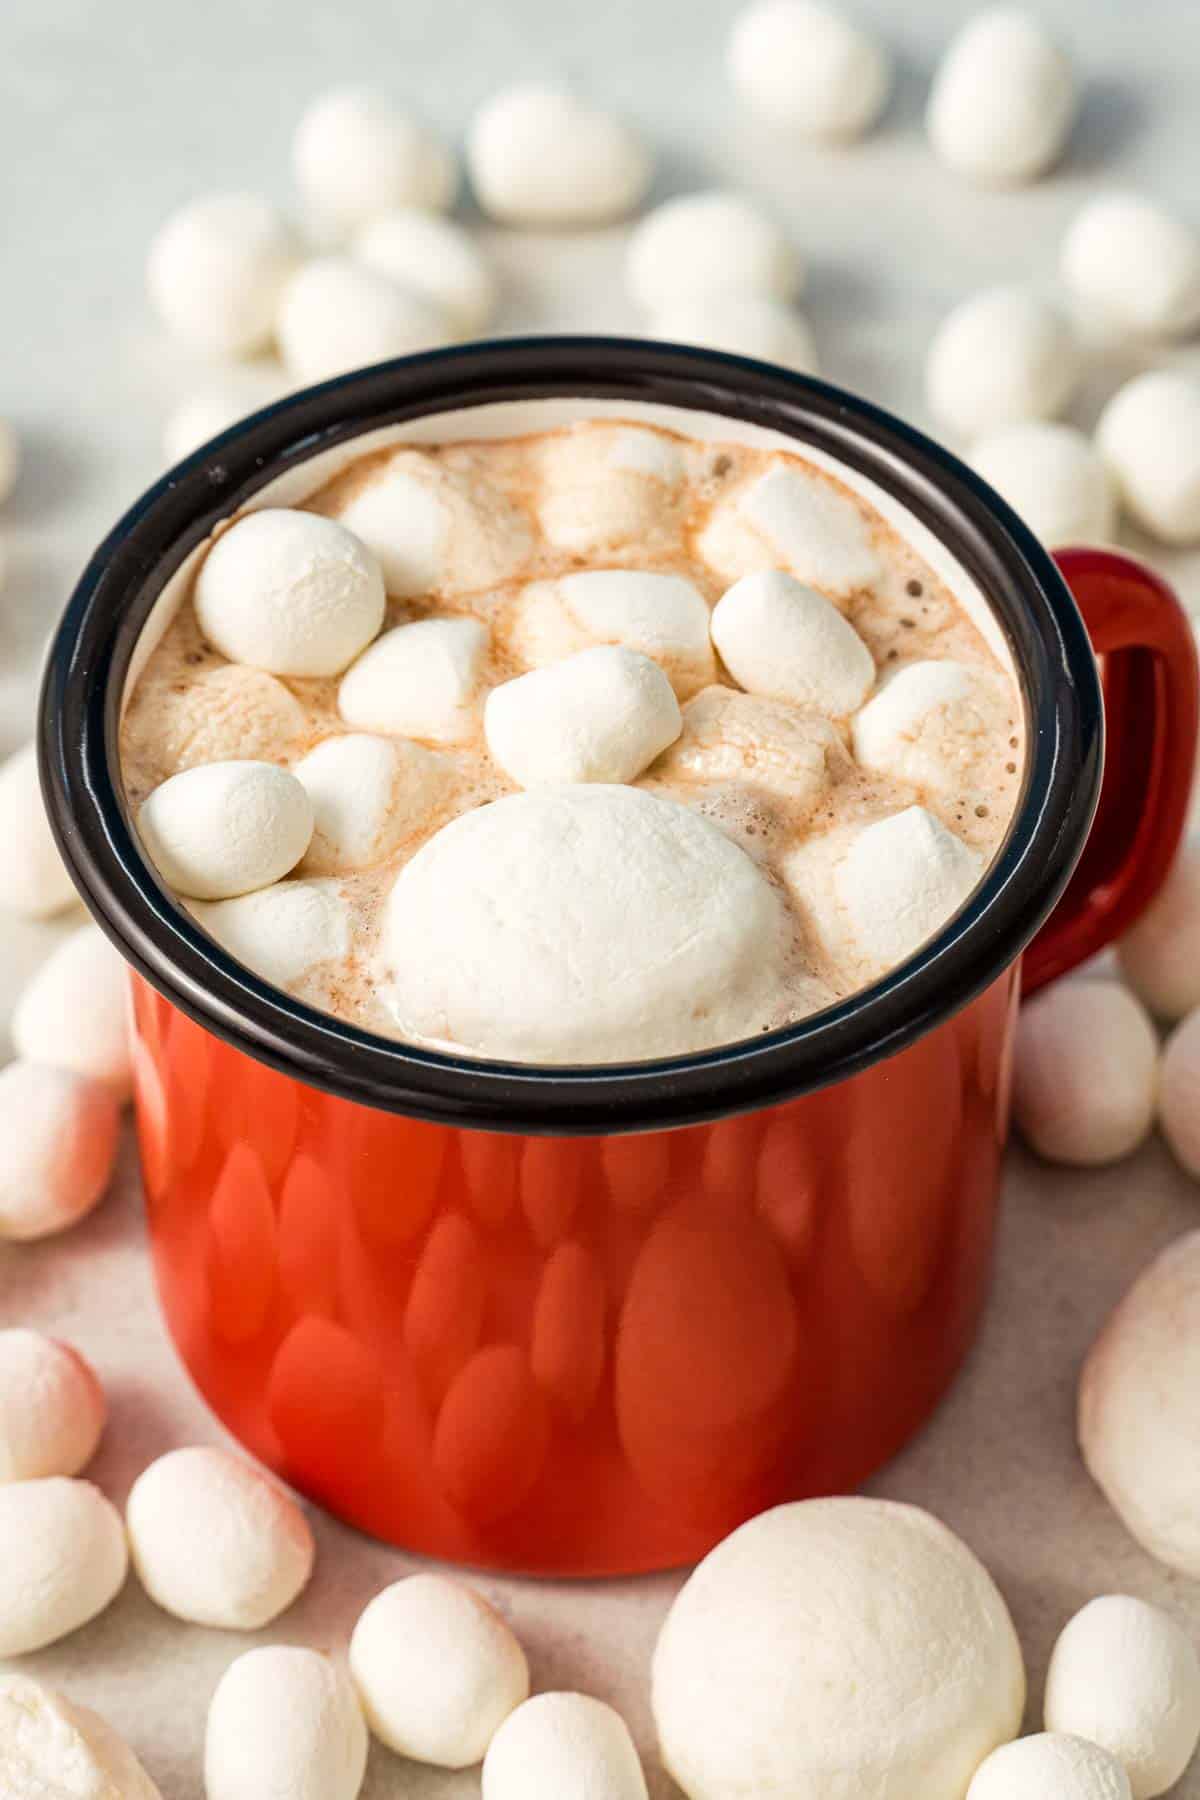 A red mug full of hot cocoa made with DIY hot cocoa mix and topped with crunchy dehydrated marshmallows.